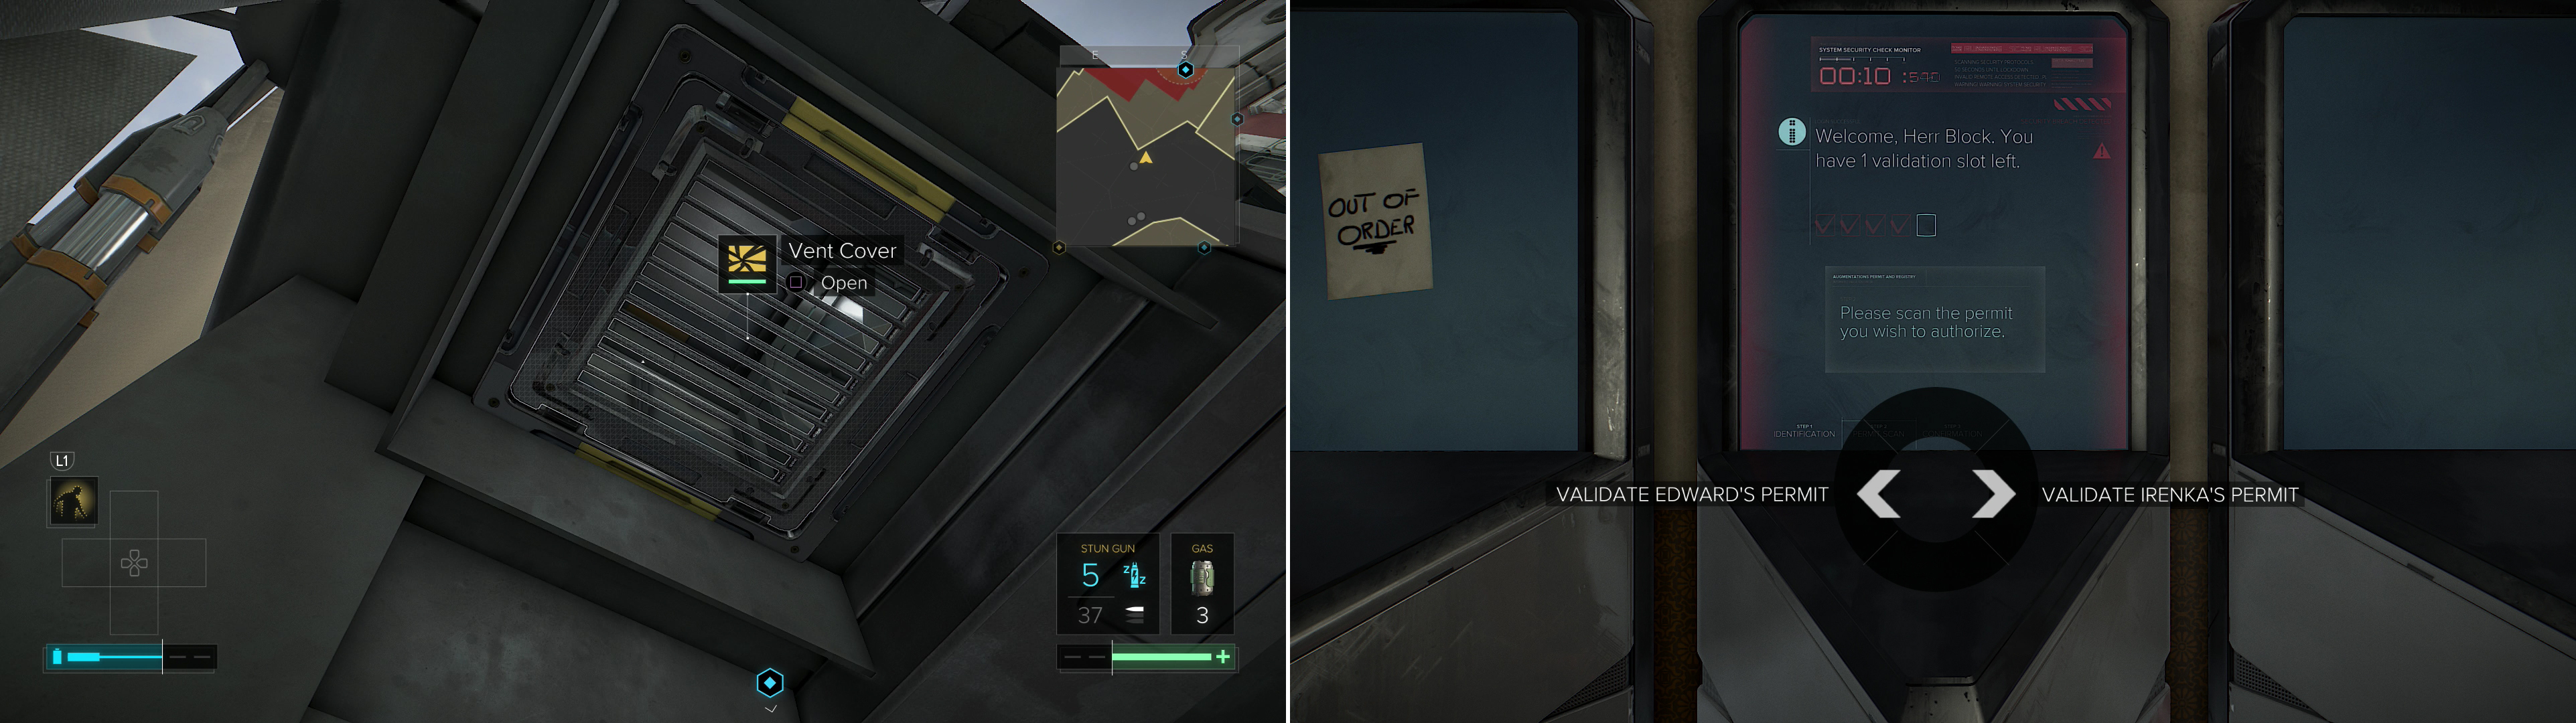 Climb through a vent near the Monument Station (left) and choose who gets the golden ticket (right).